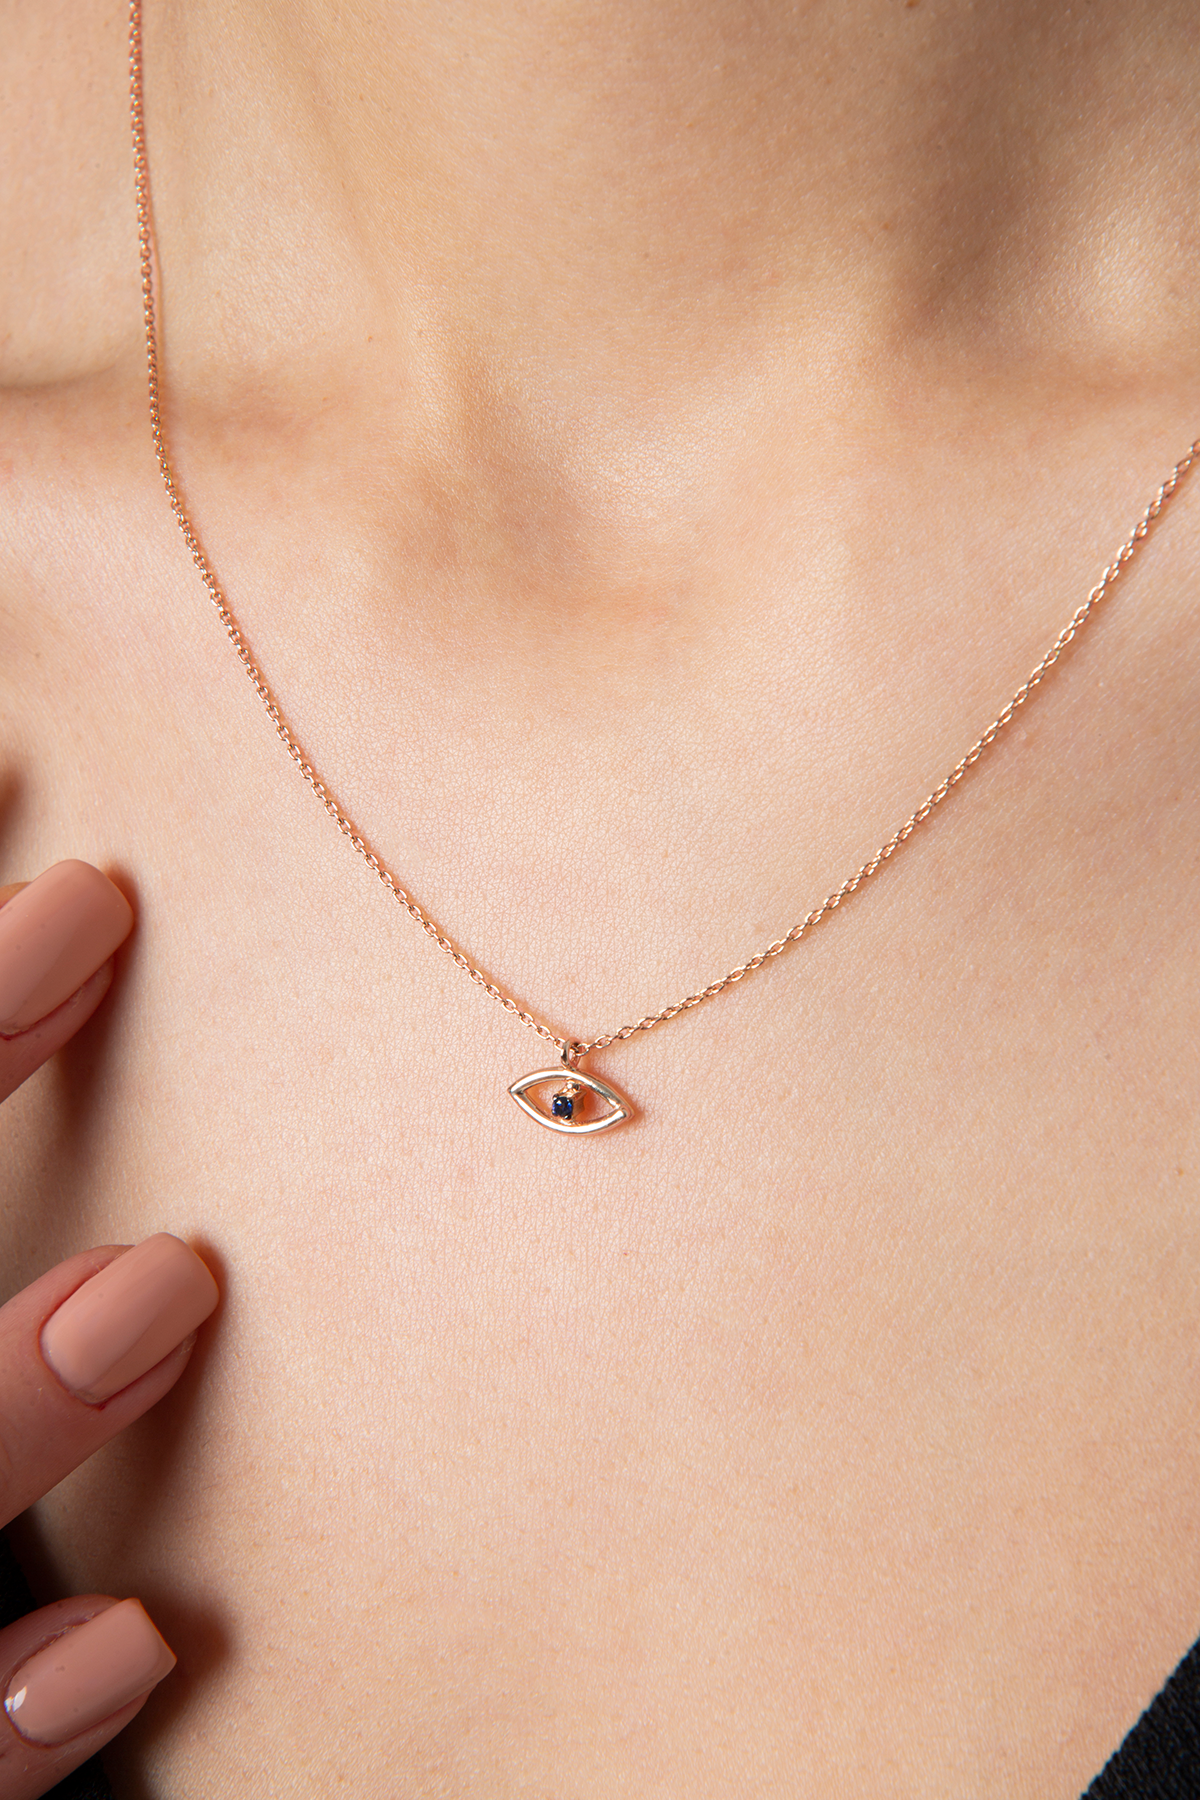 Mini Pure Magic Knot Necklace in Rose Gold - Her Story Shop